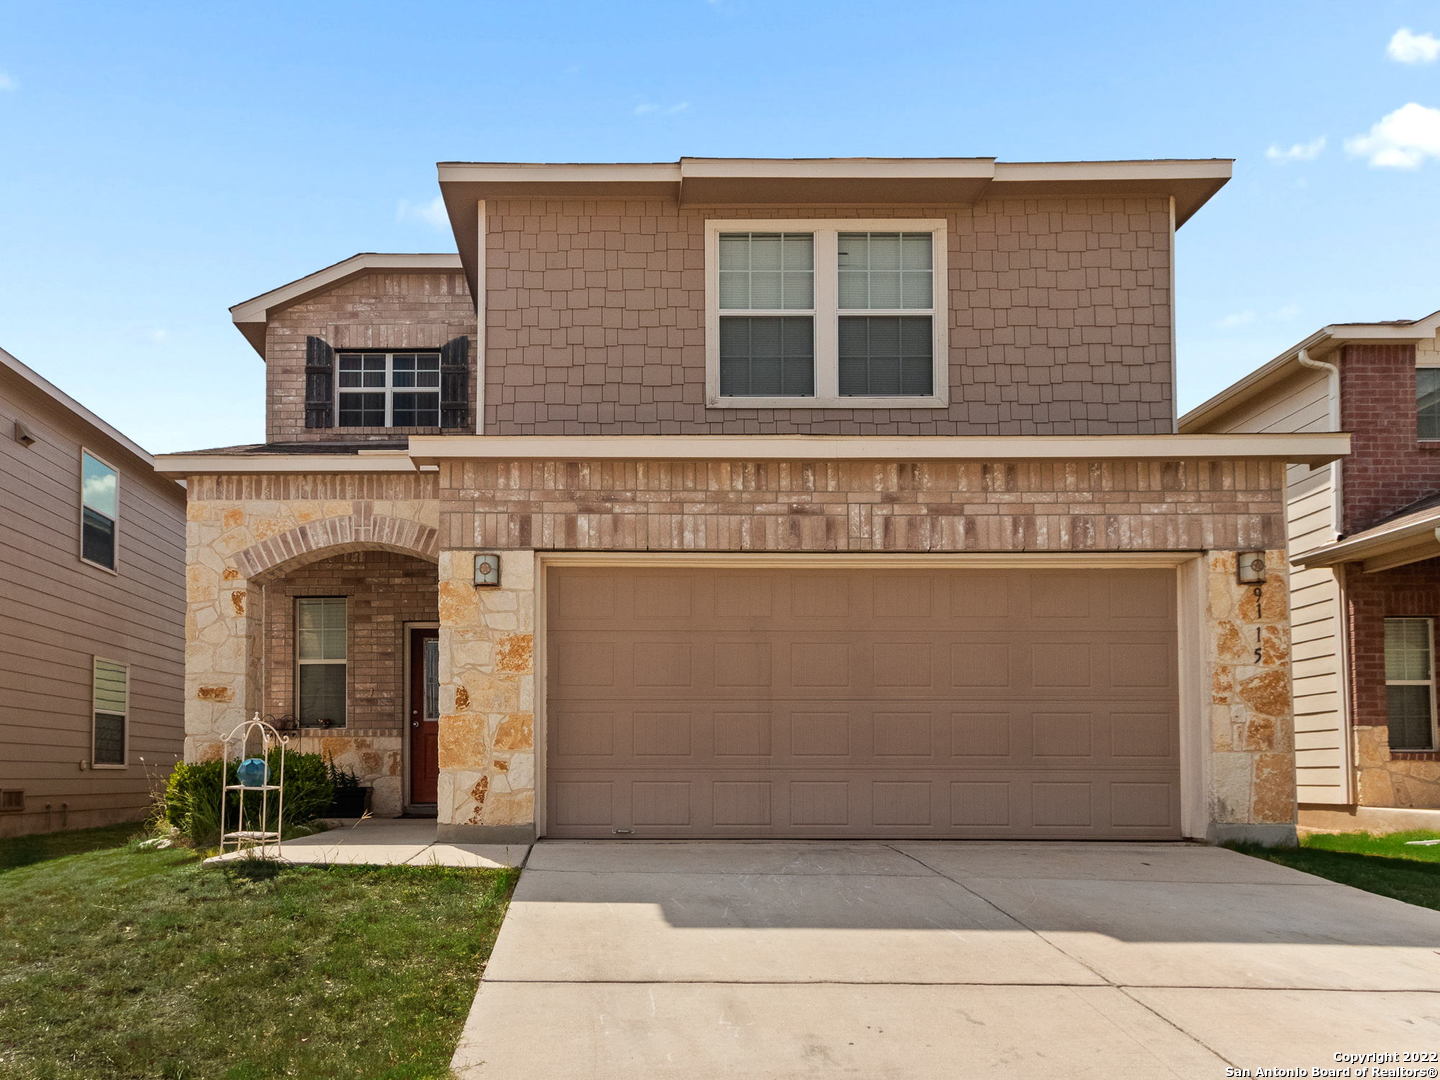 Located off Shaenfield in the Silver Oaks Subdivision. This Centex built home is ready for its new owner. Home features 3 bedrooms and 3 baths with a study and upstairs loft/game room. Guest suite is located downstairs alongside its full bathroom. Massive backyard for entertaining.